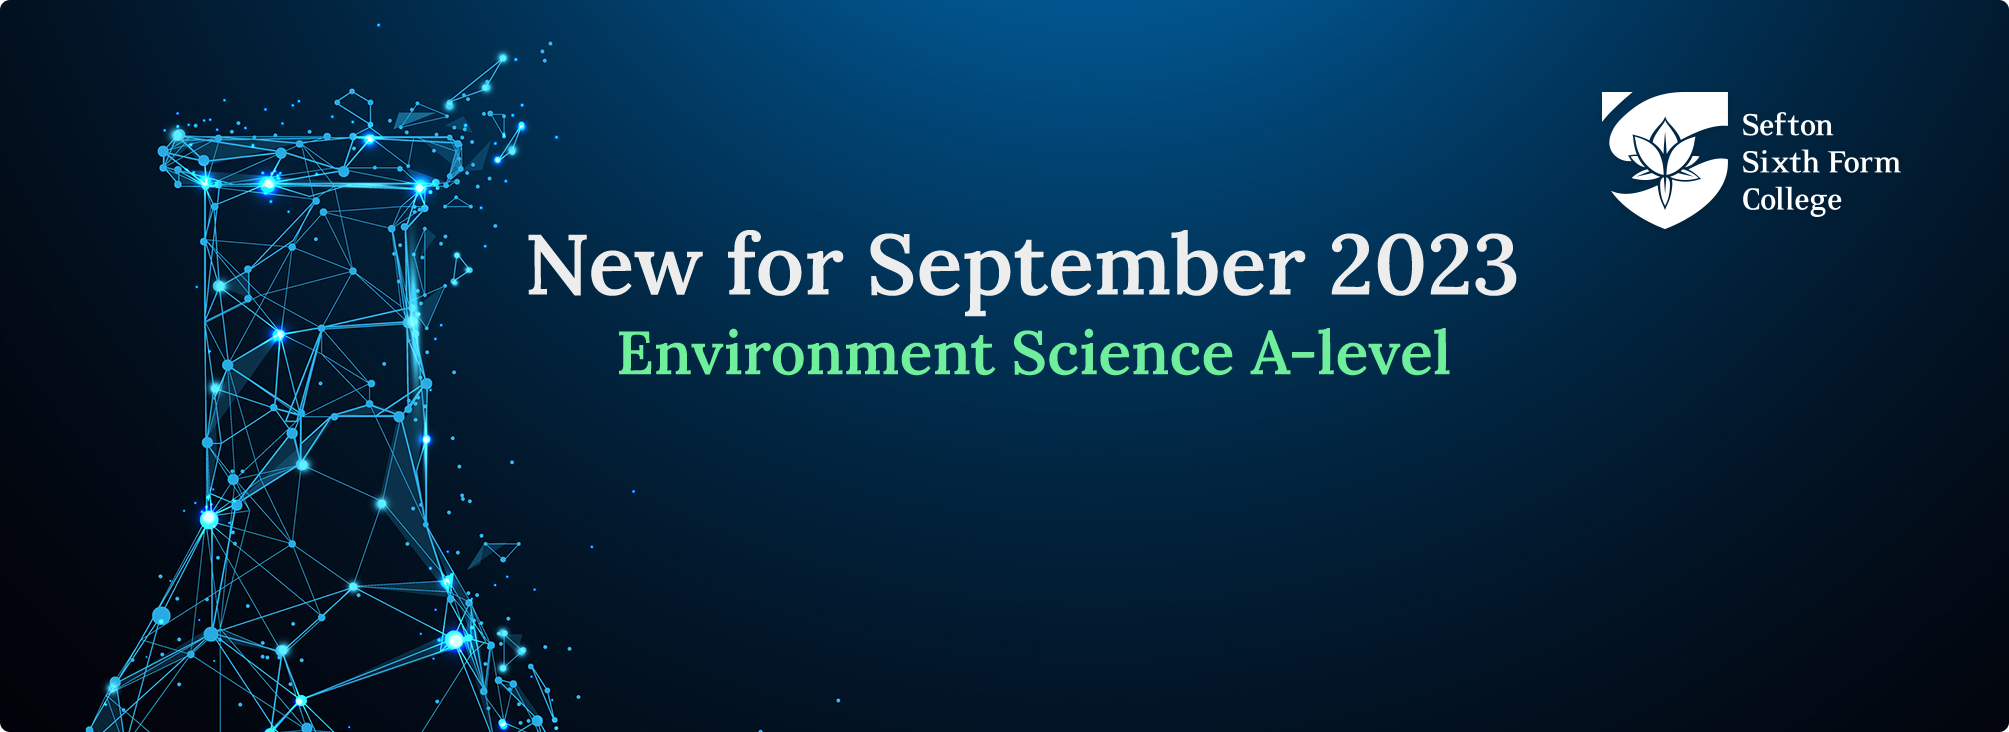 New for september 2023, environmental science a-level